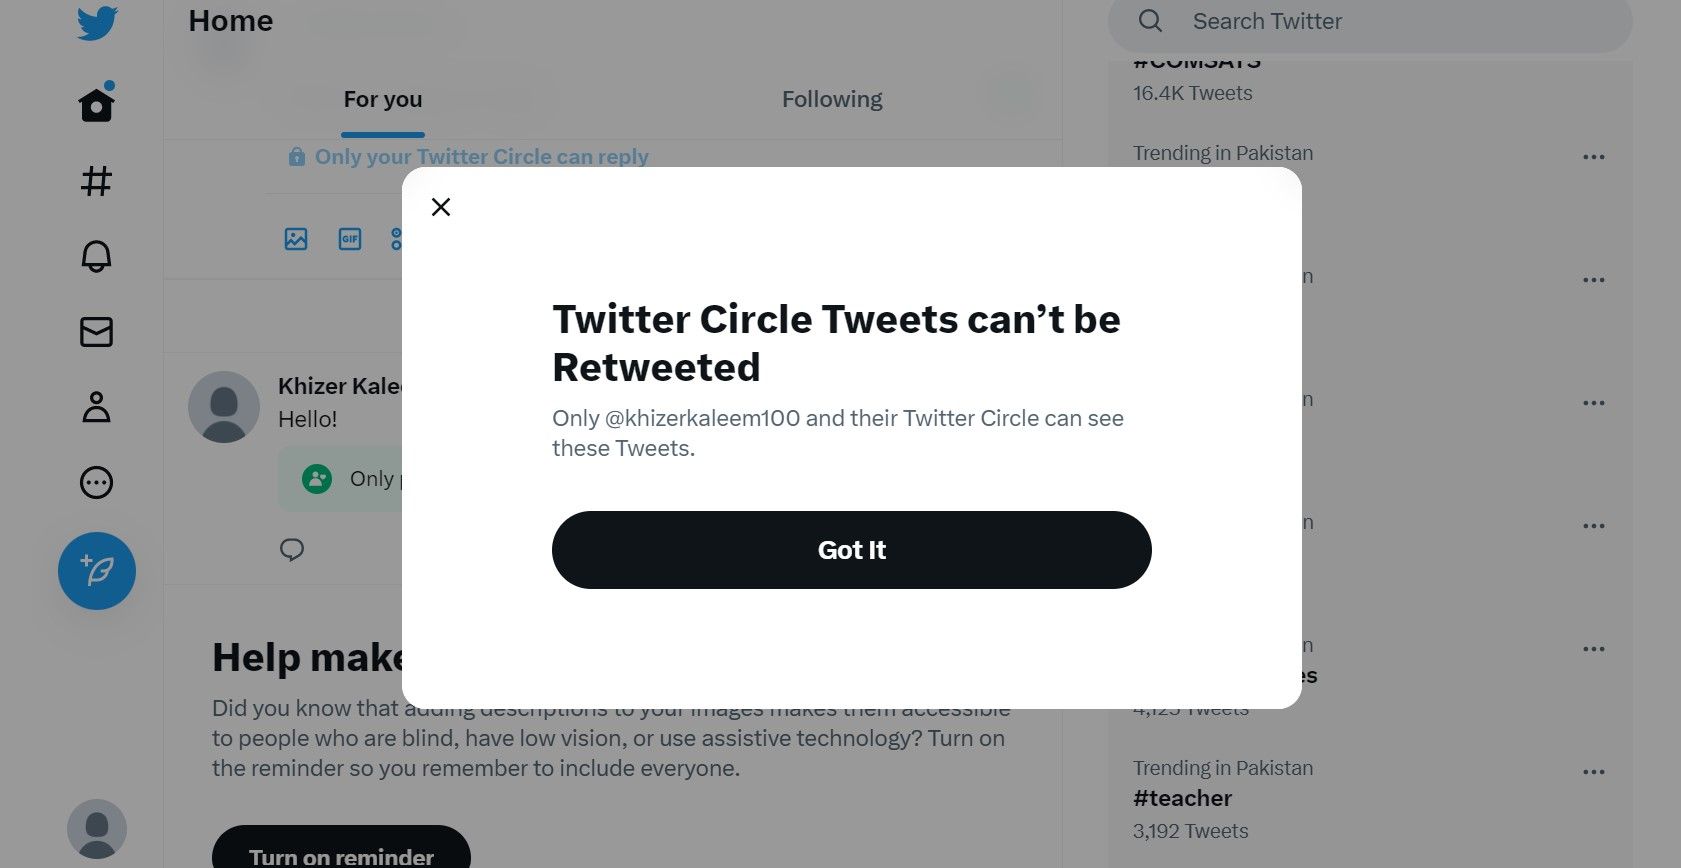 Retweeting option not available